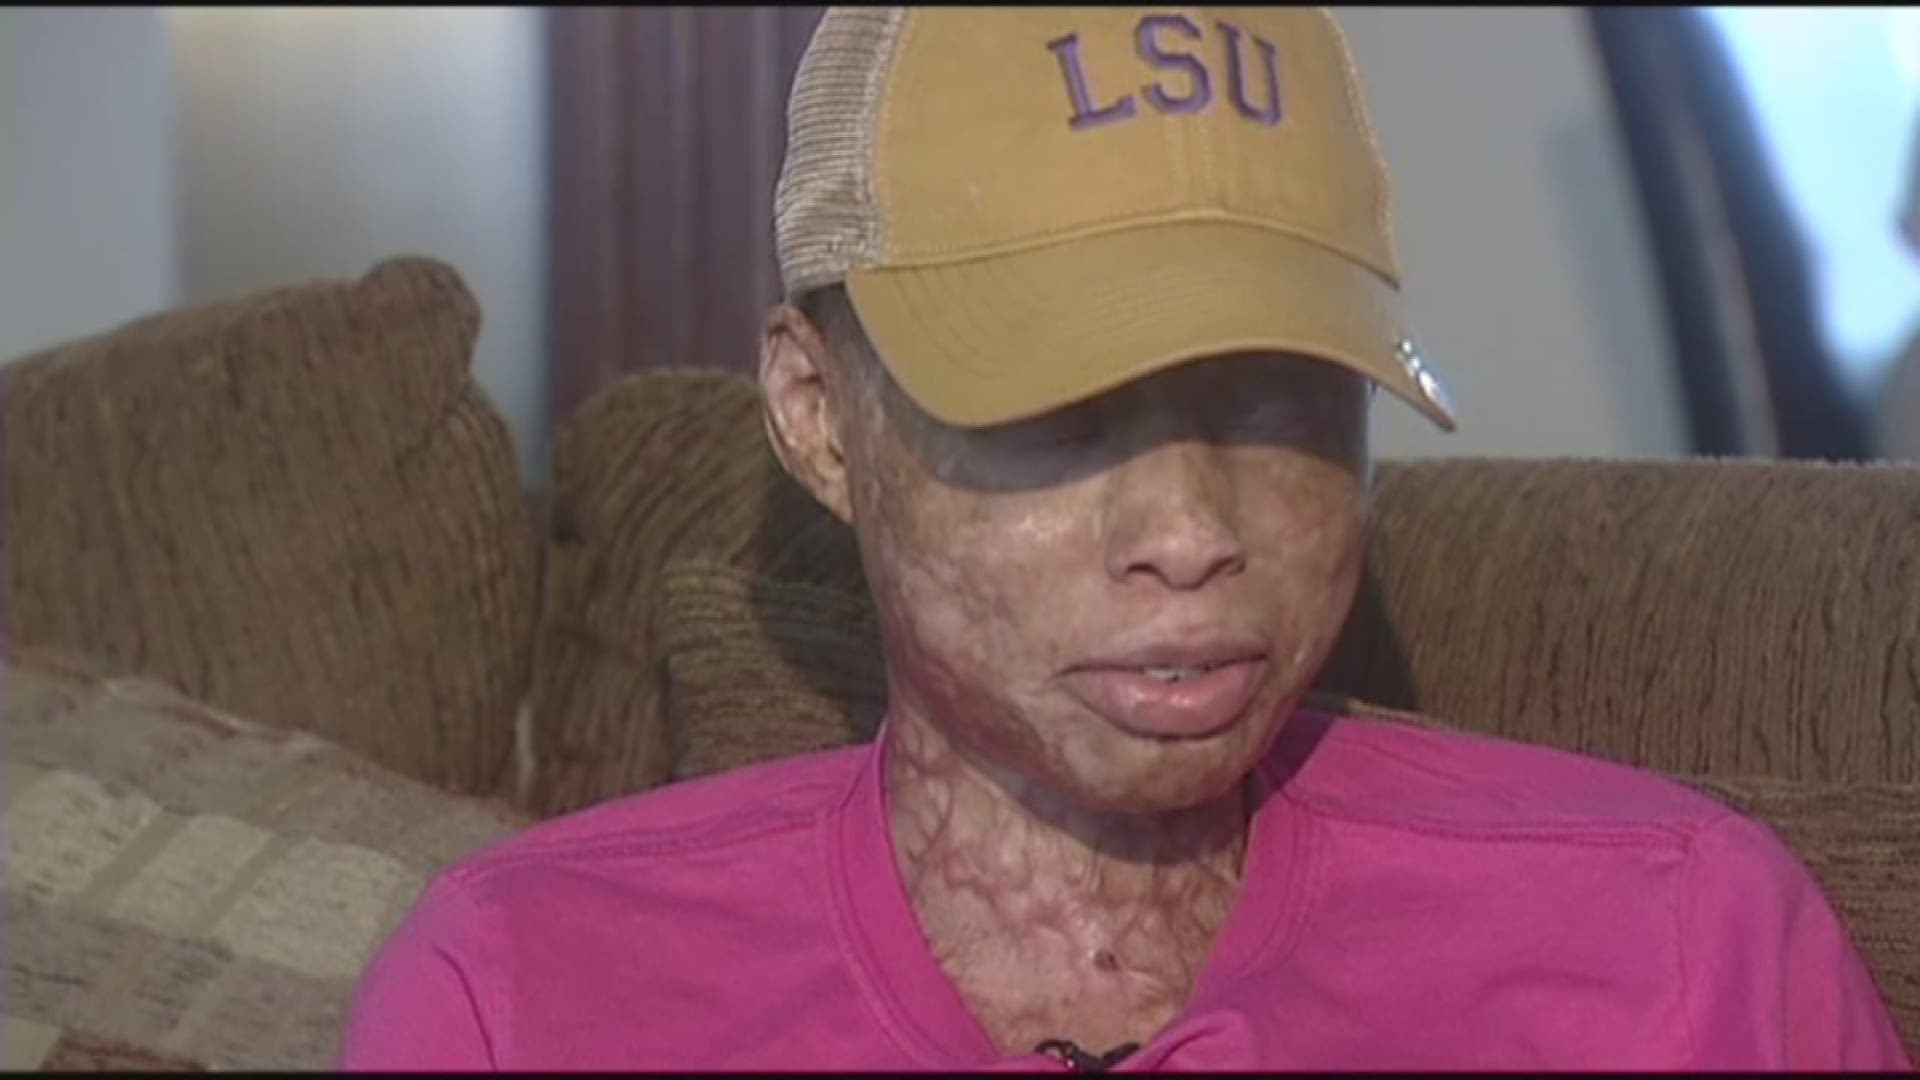 College student living with lifelong disfiguring injuries sues drug company